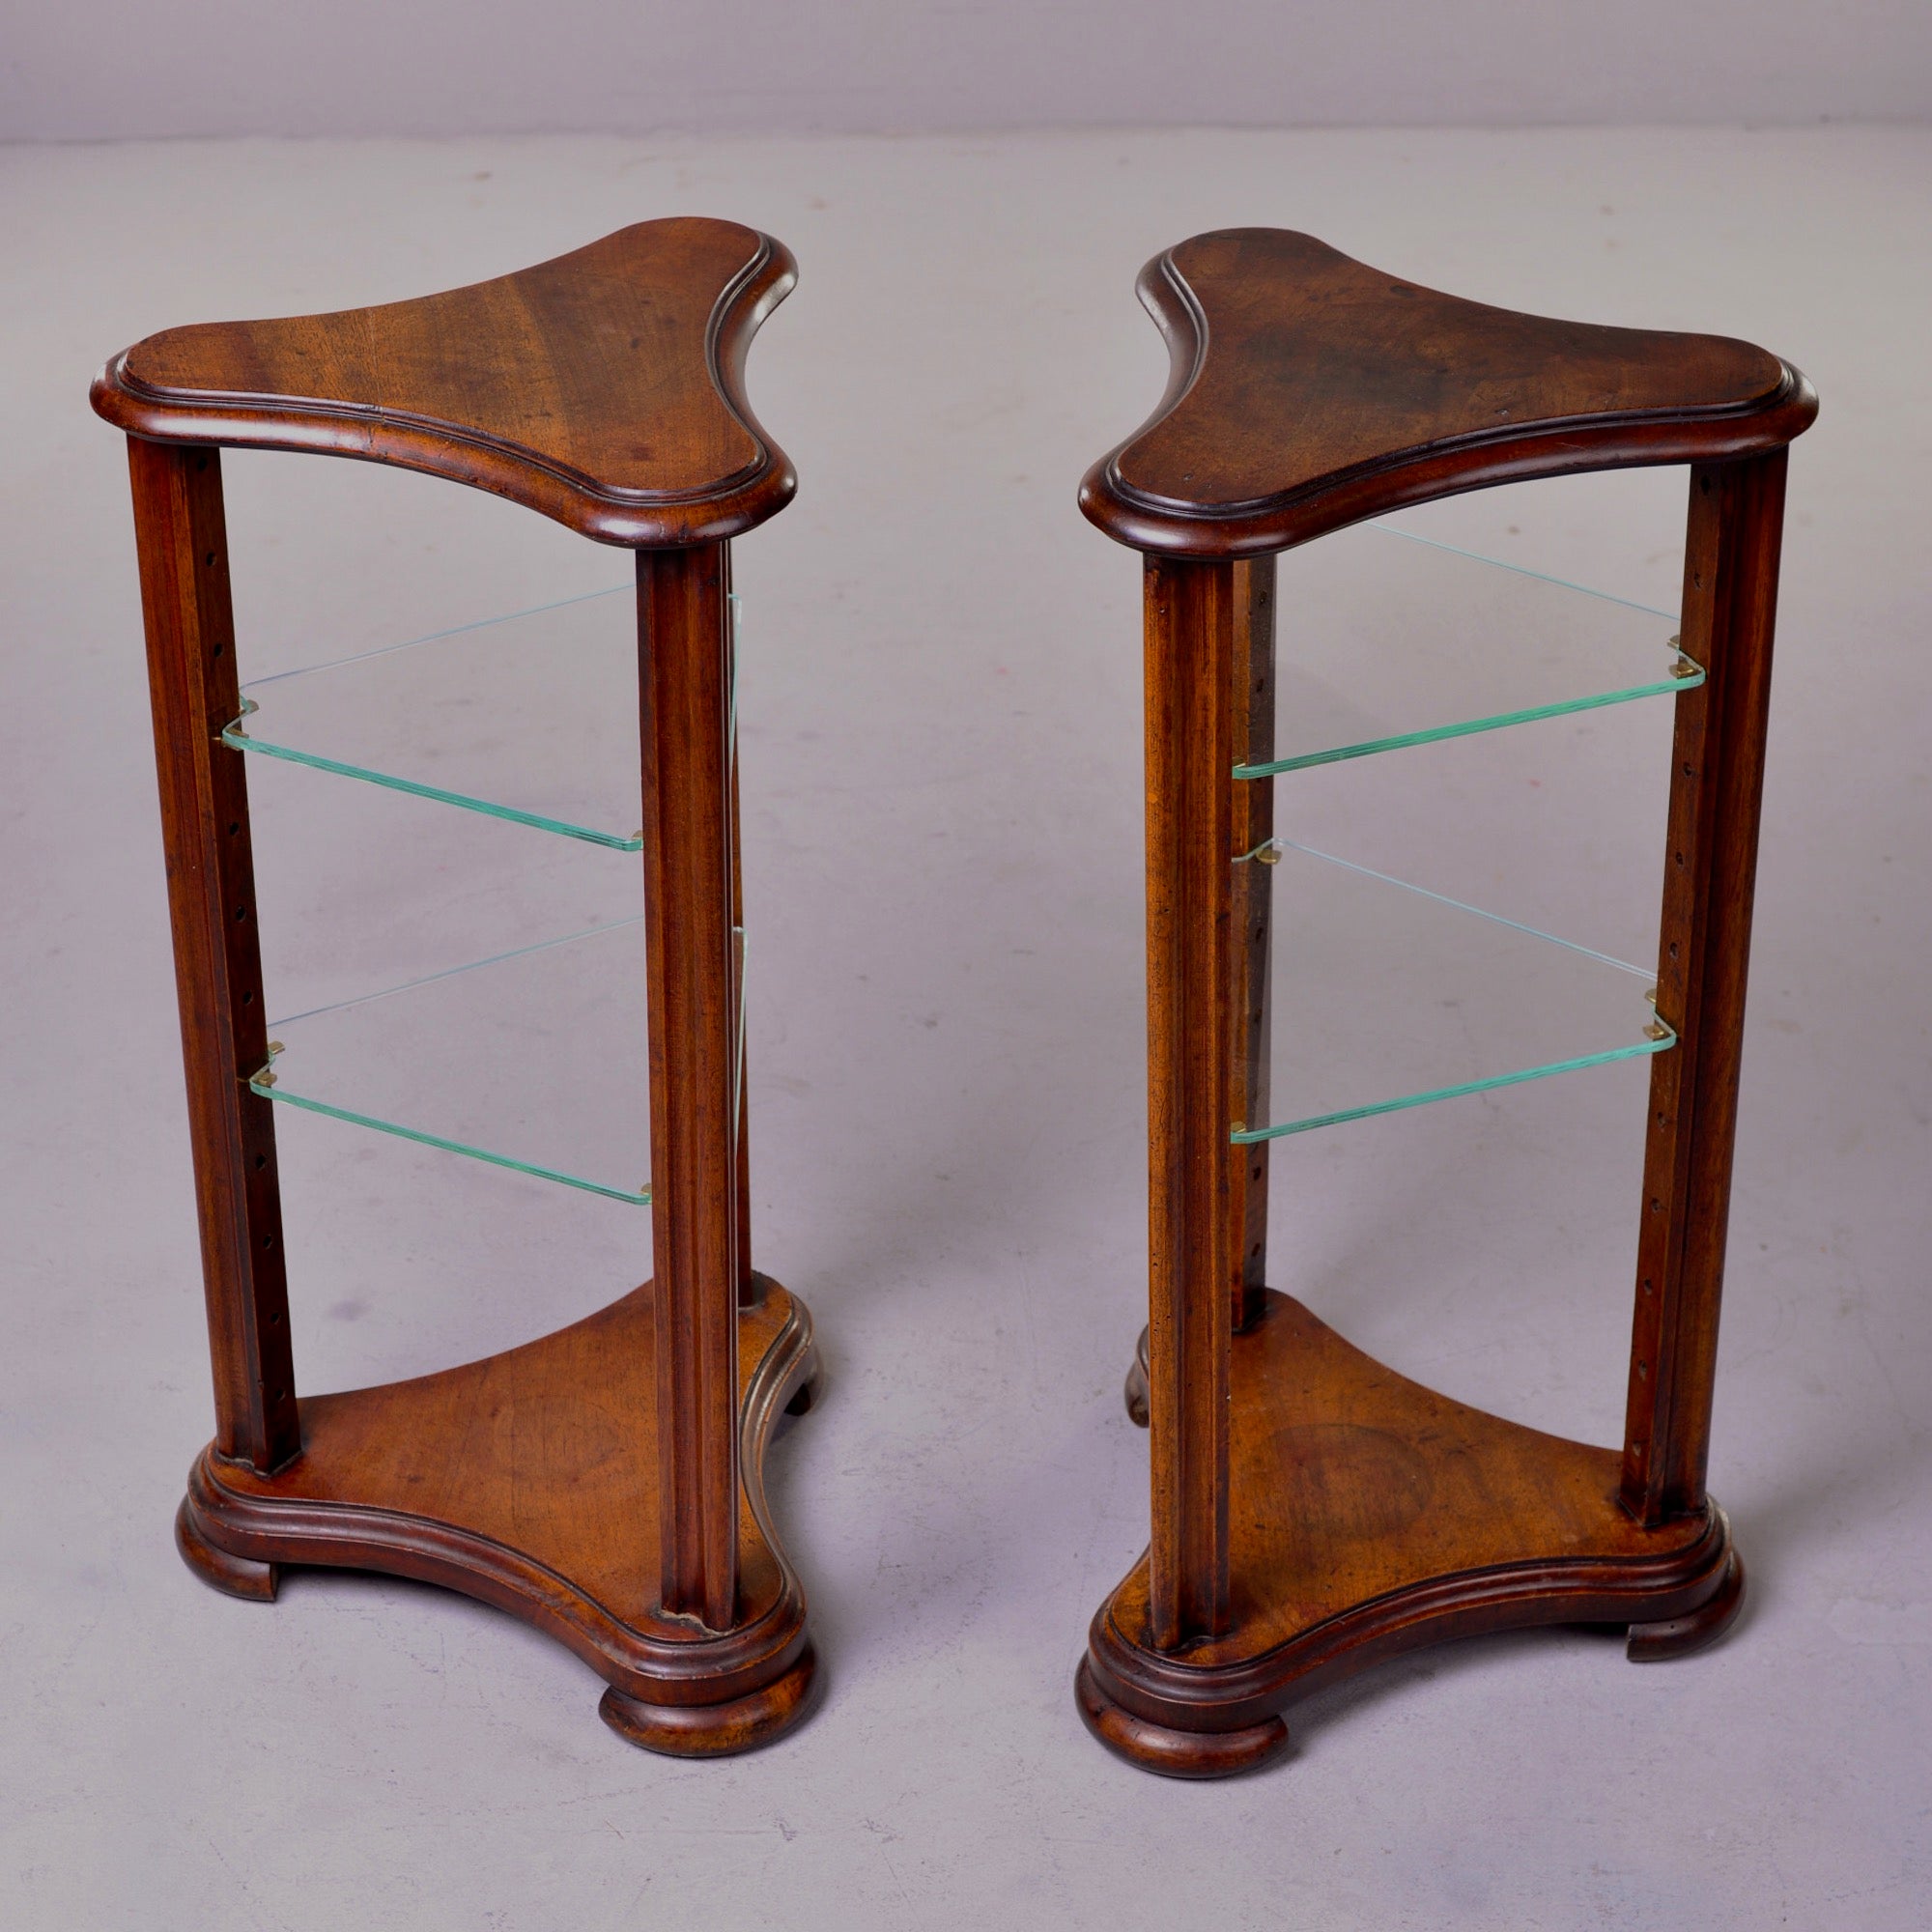 Pair of Unusual Walnut Stands with Glass Shelves For Sale